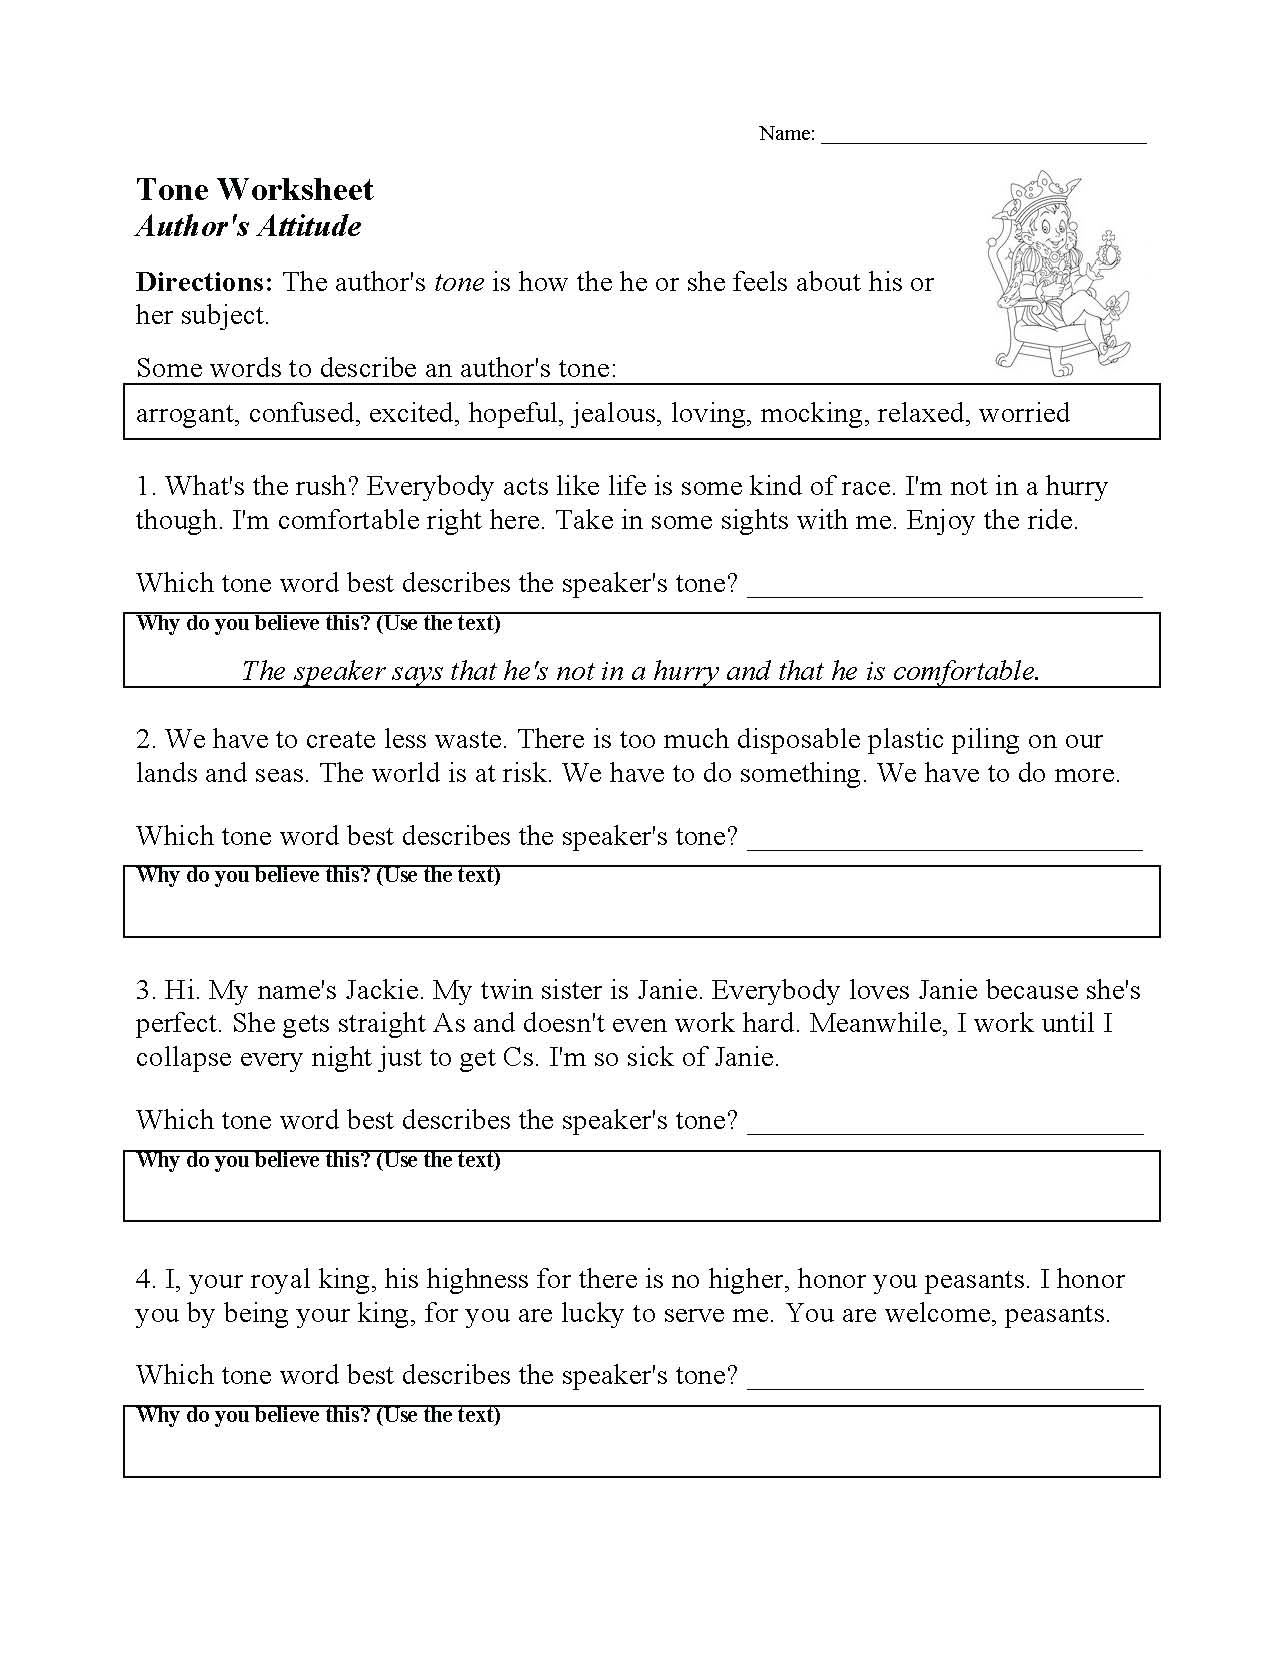 This is a preview image of our Tone Worksheet. Click on it to enlarge this image and view the source file.